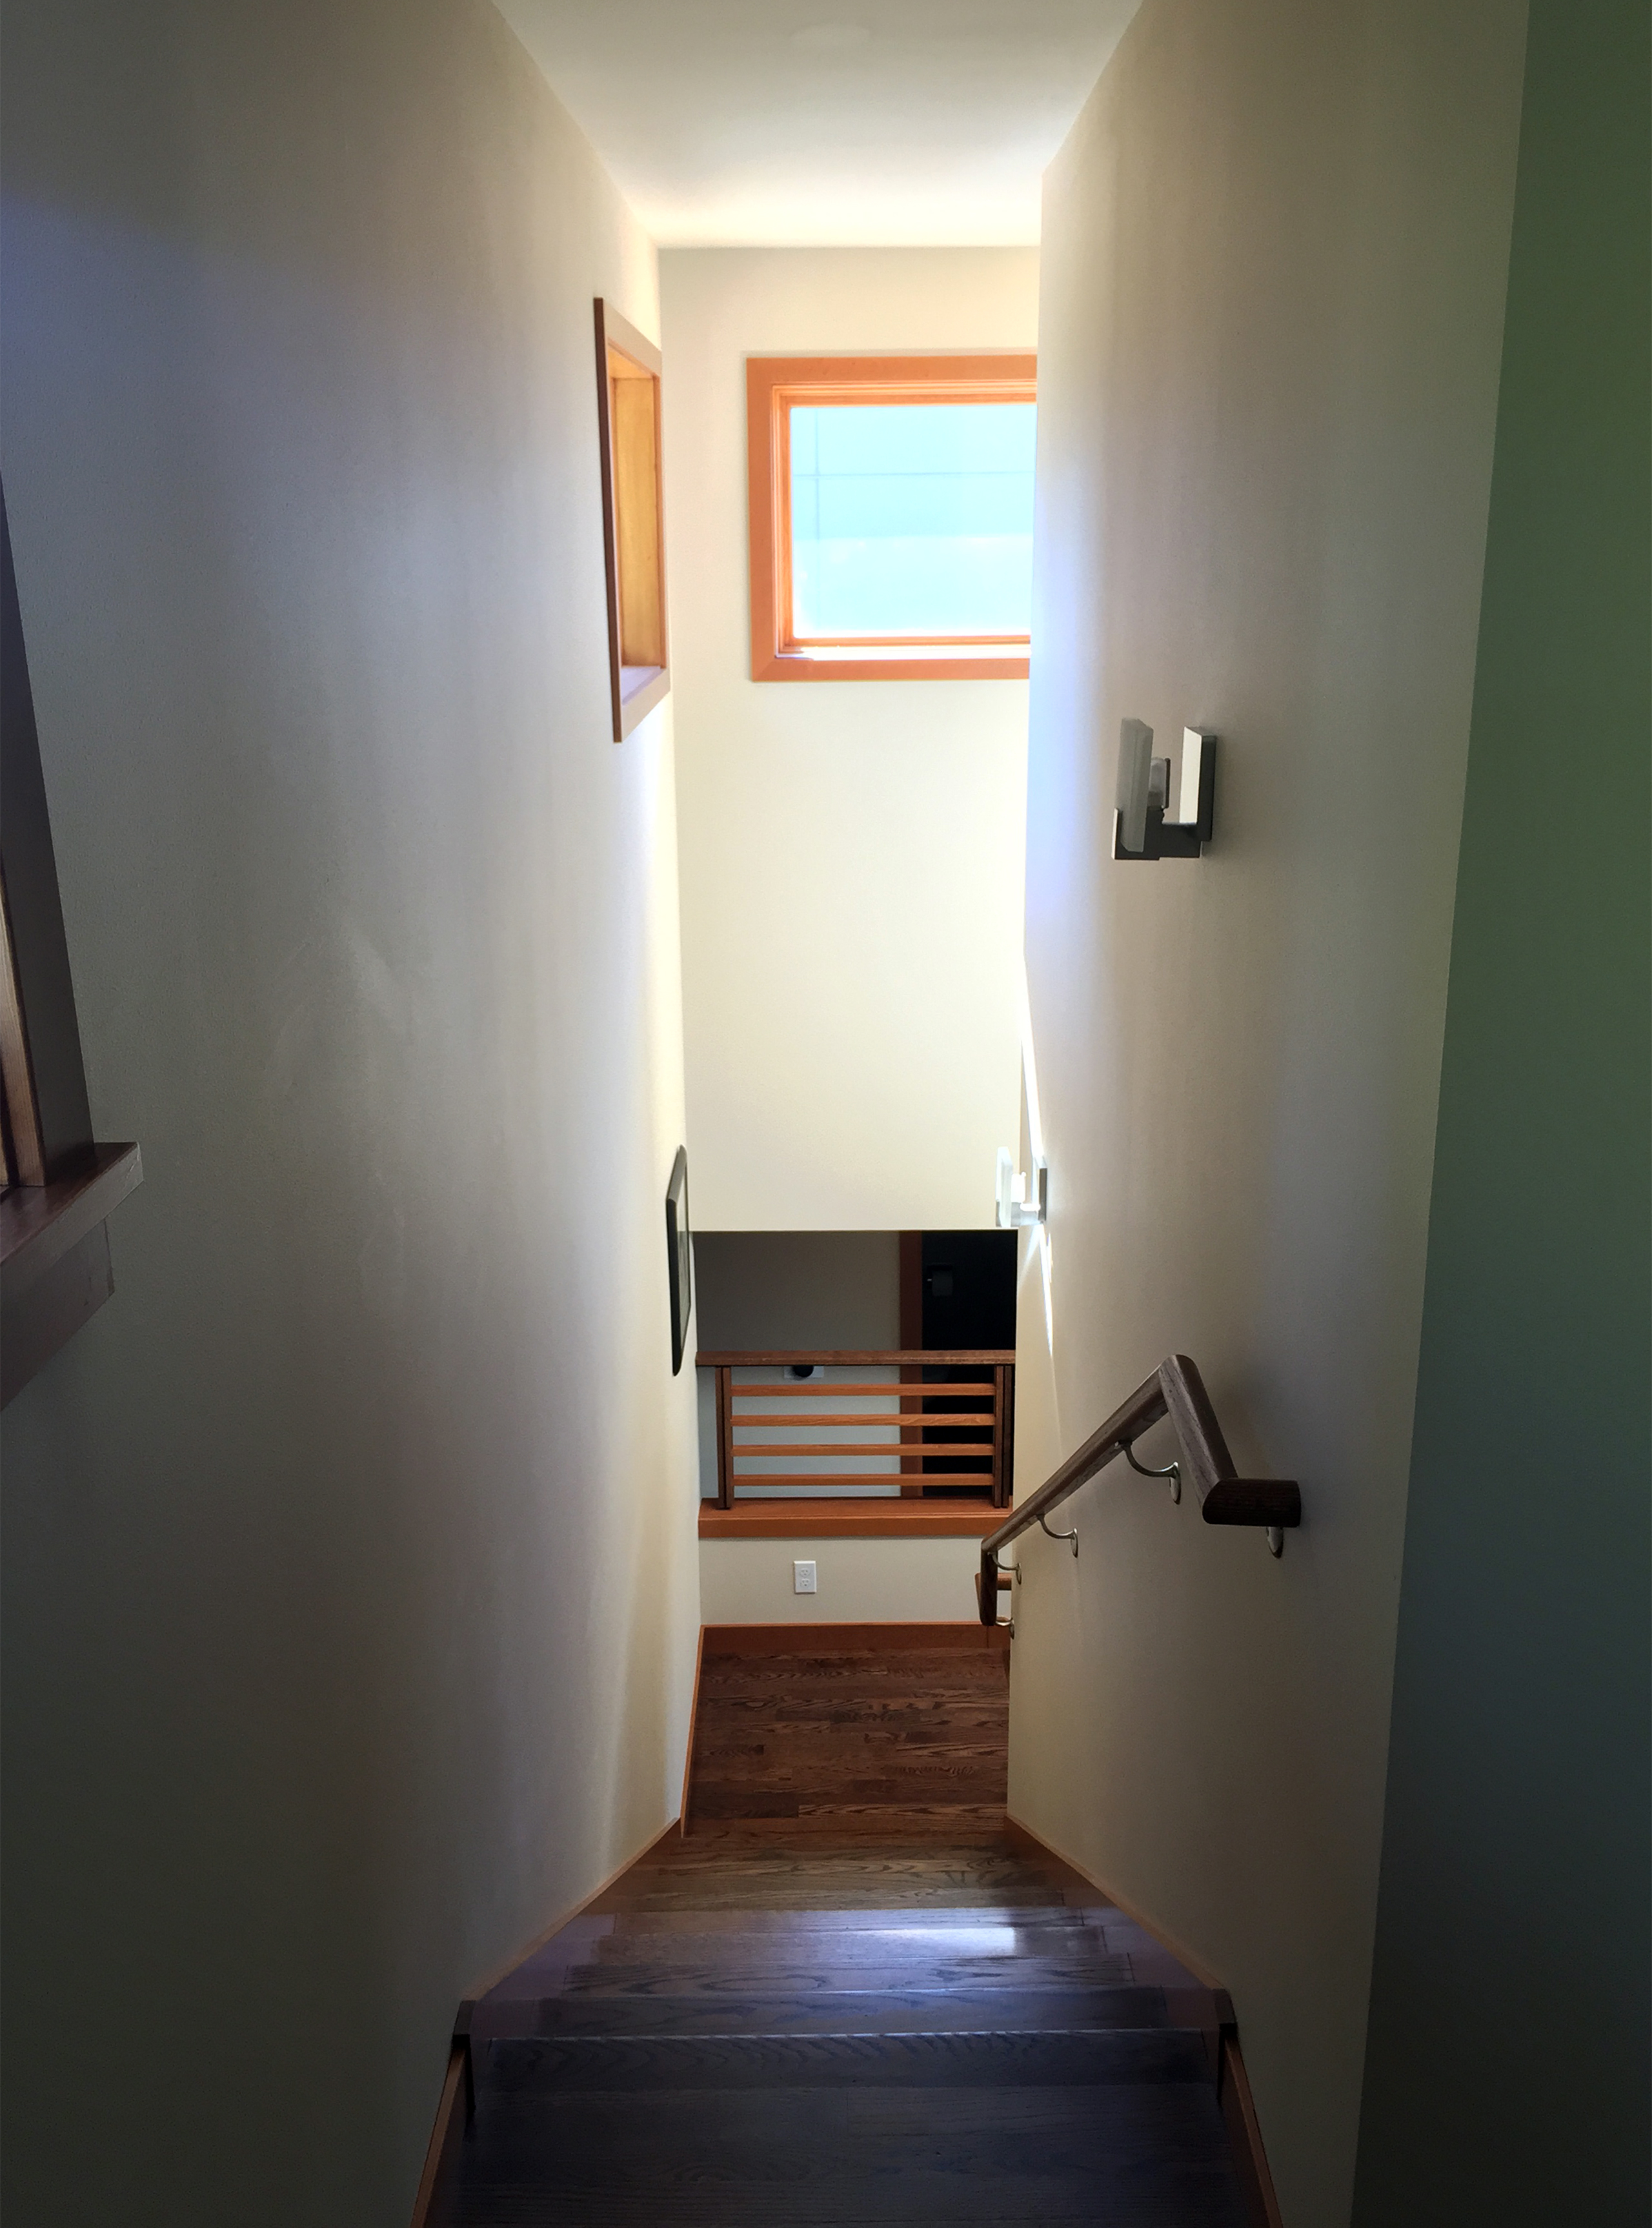 92nd Street Remodel & Addition - Before and After Remodel Photos: Stair Down from Master Suite, After